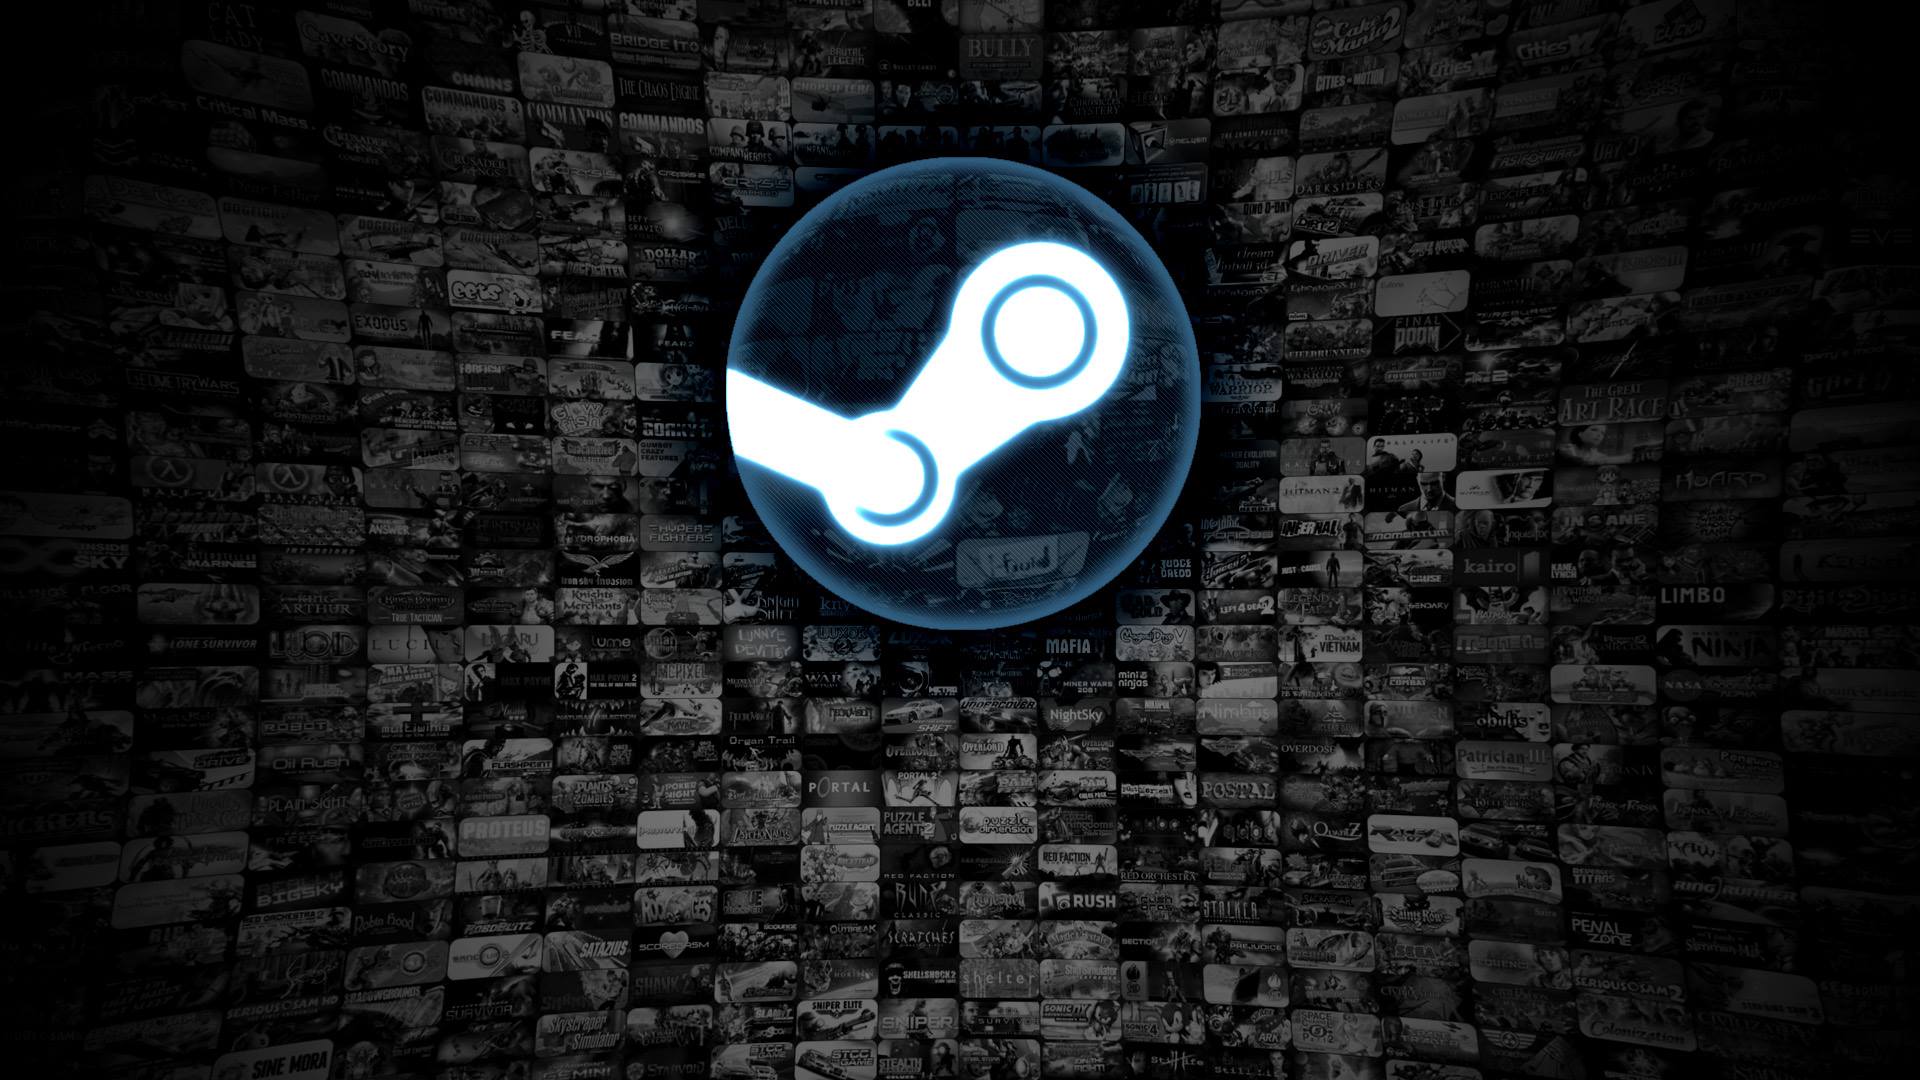 50% of all Steam 2017 revenue was generated by only 100 games